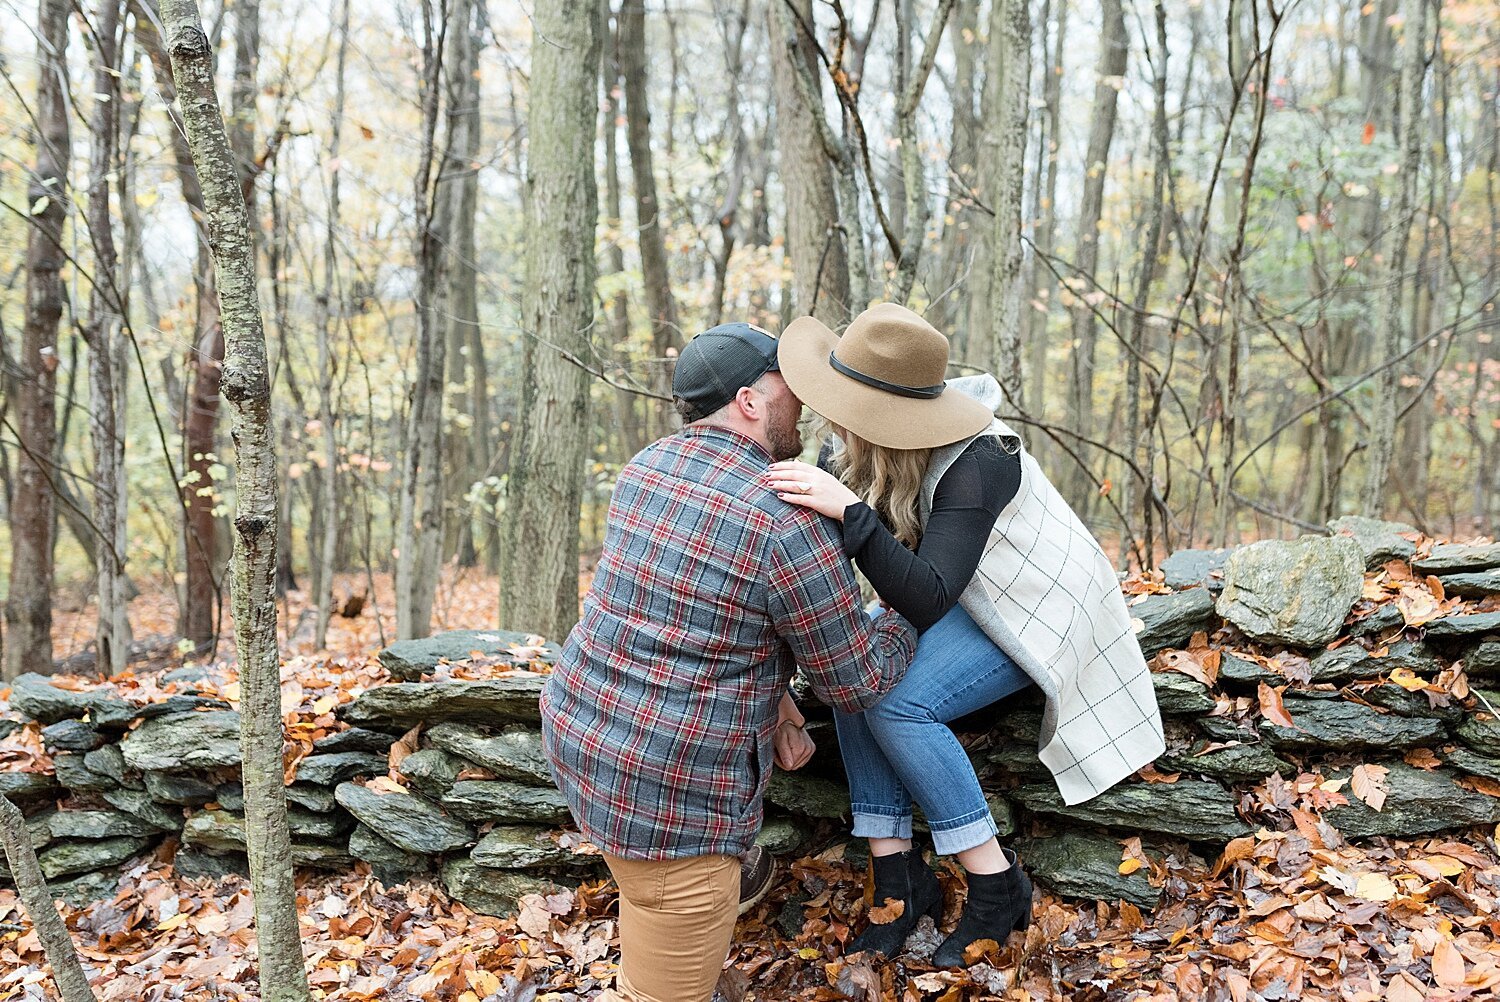 Pinnacle Overlook Holtwood PA Surprise Proposal Photography_8721.jpg